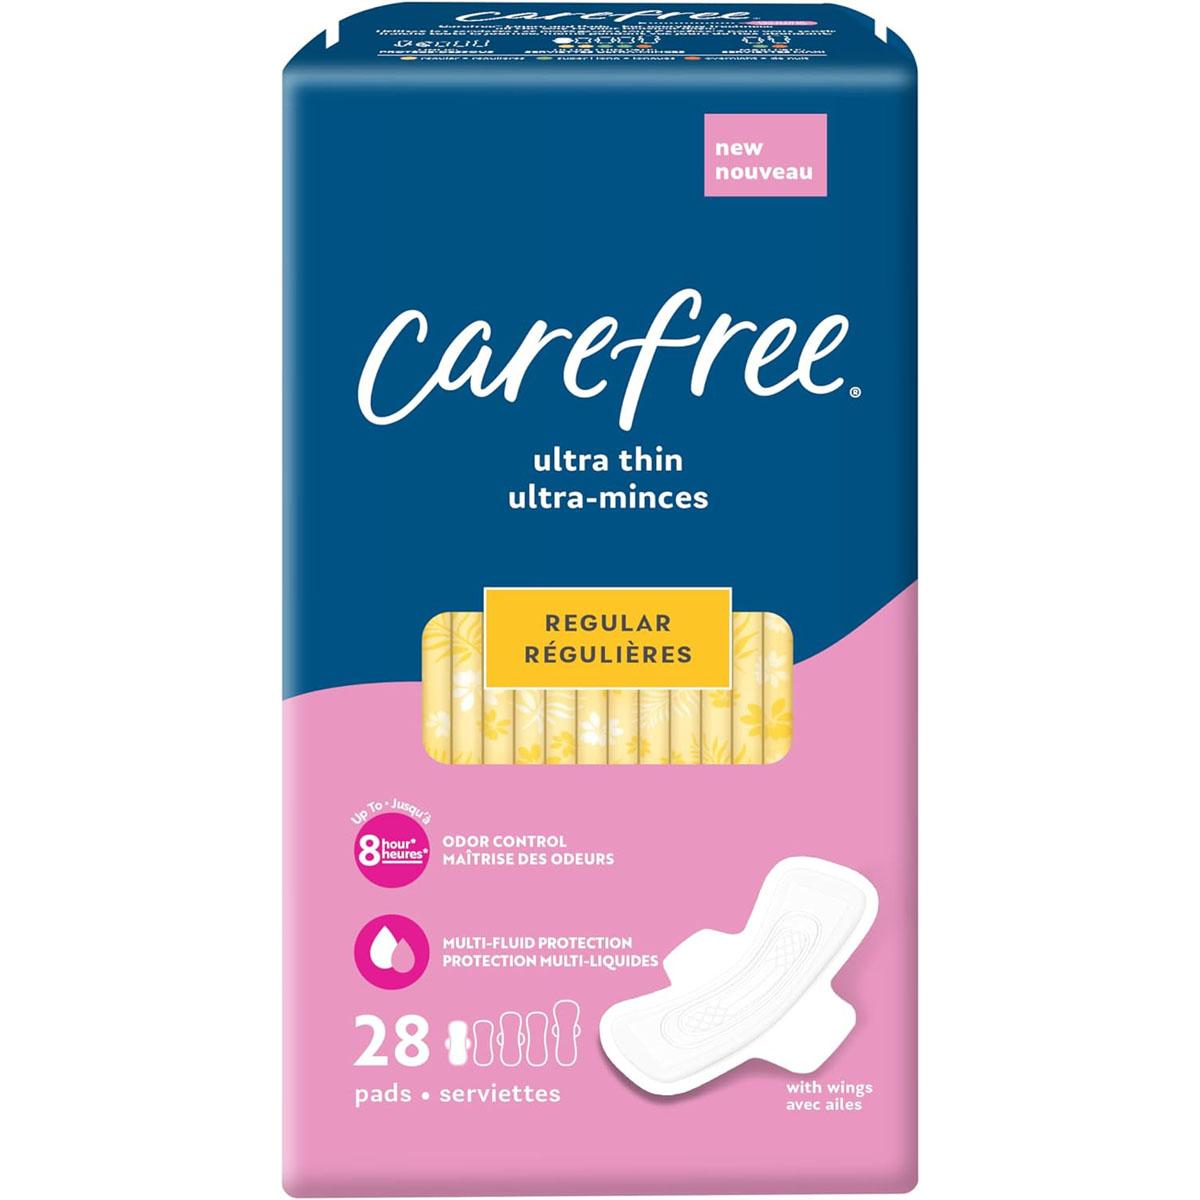 Carefree Ultra Thin Pads 28 Pack for $2.49